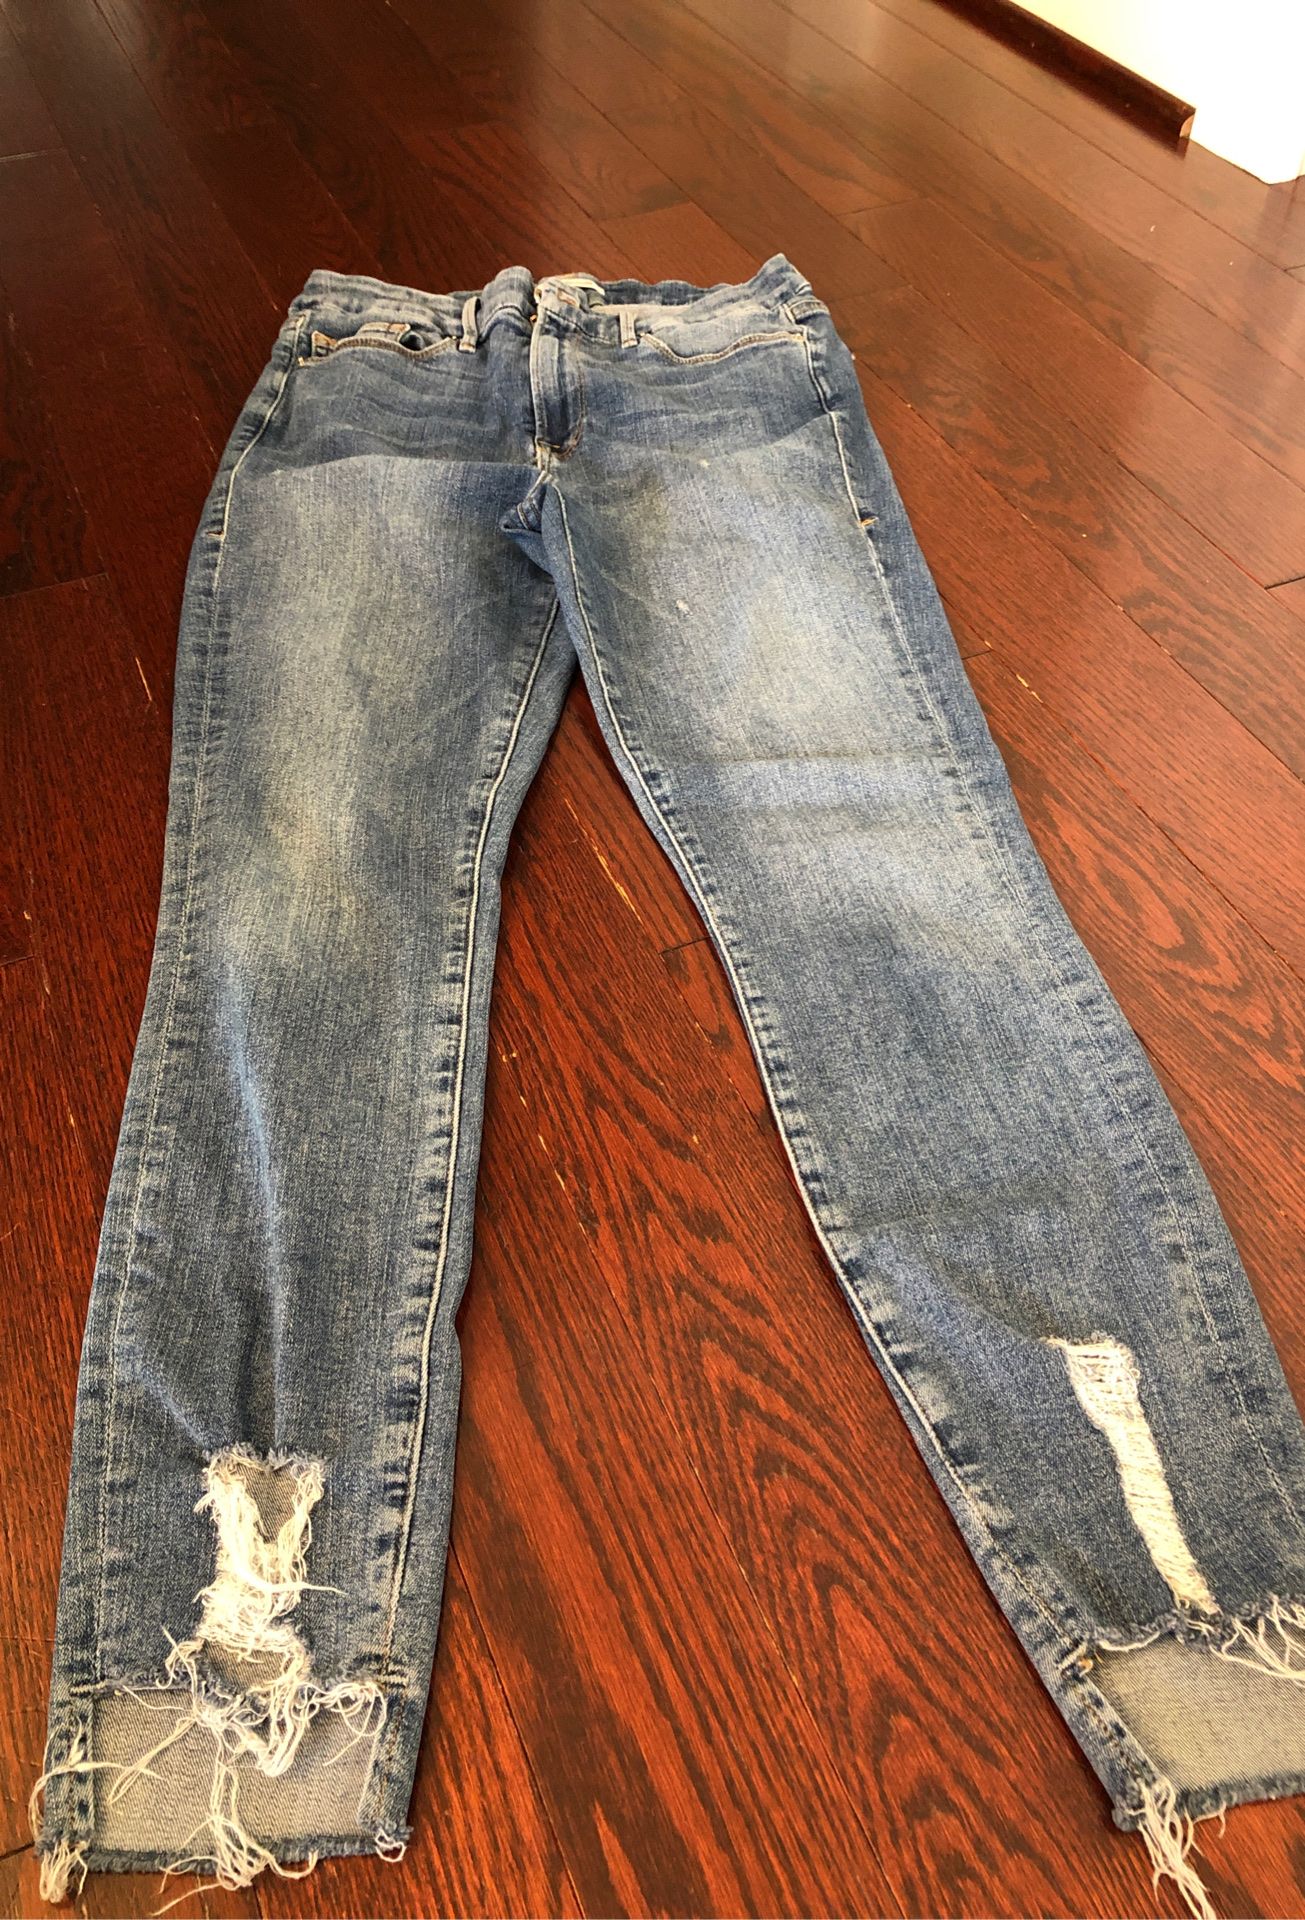 Good American cut jeans from Nordstrom Size 10/30